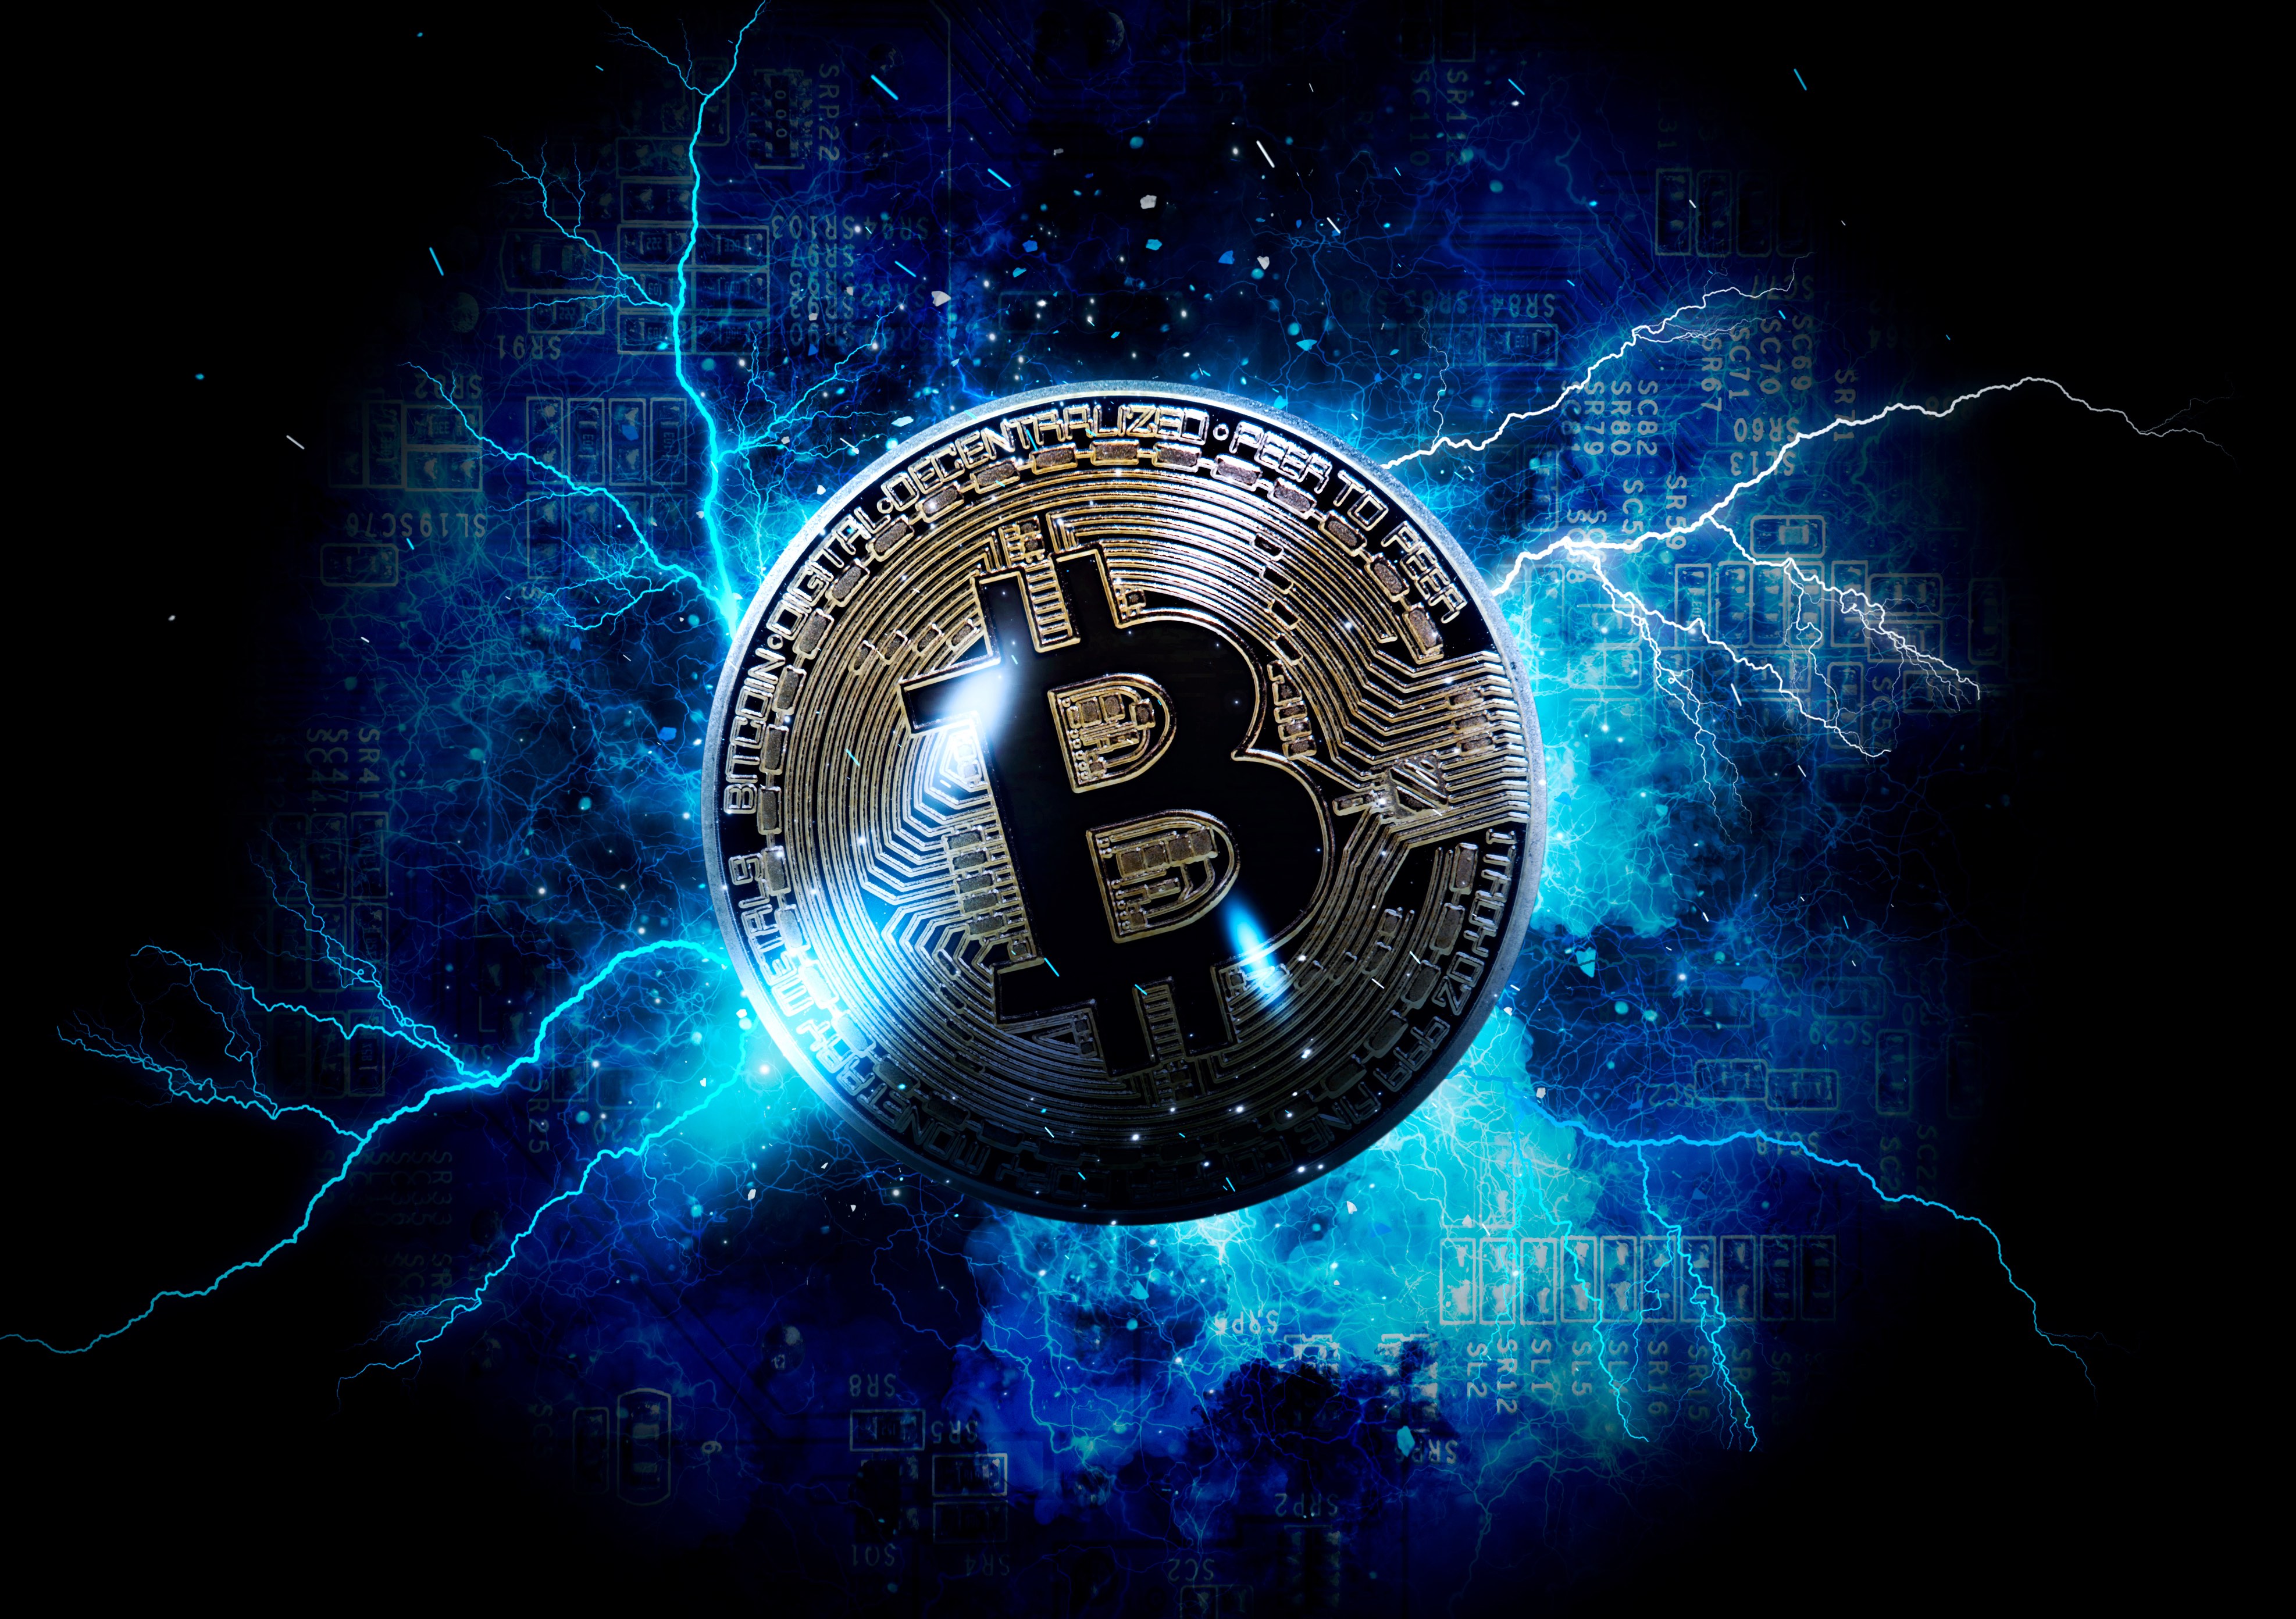 A Protocol For Issuing Tokens Launches On Bitcoin’s Lightning Network